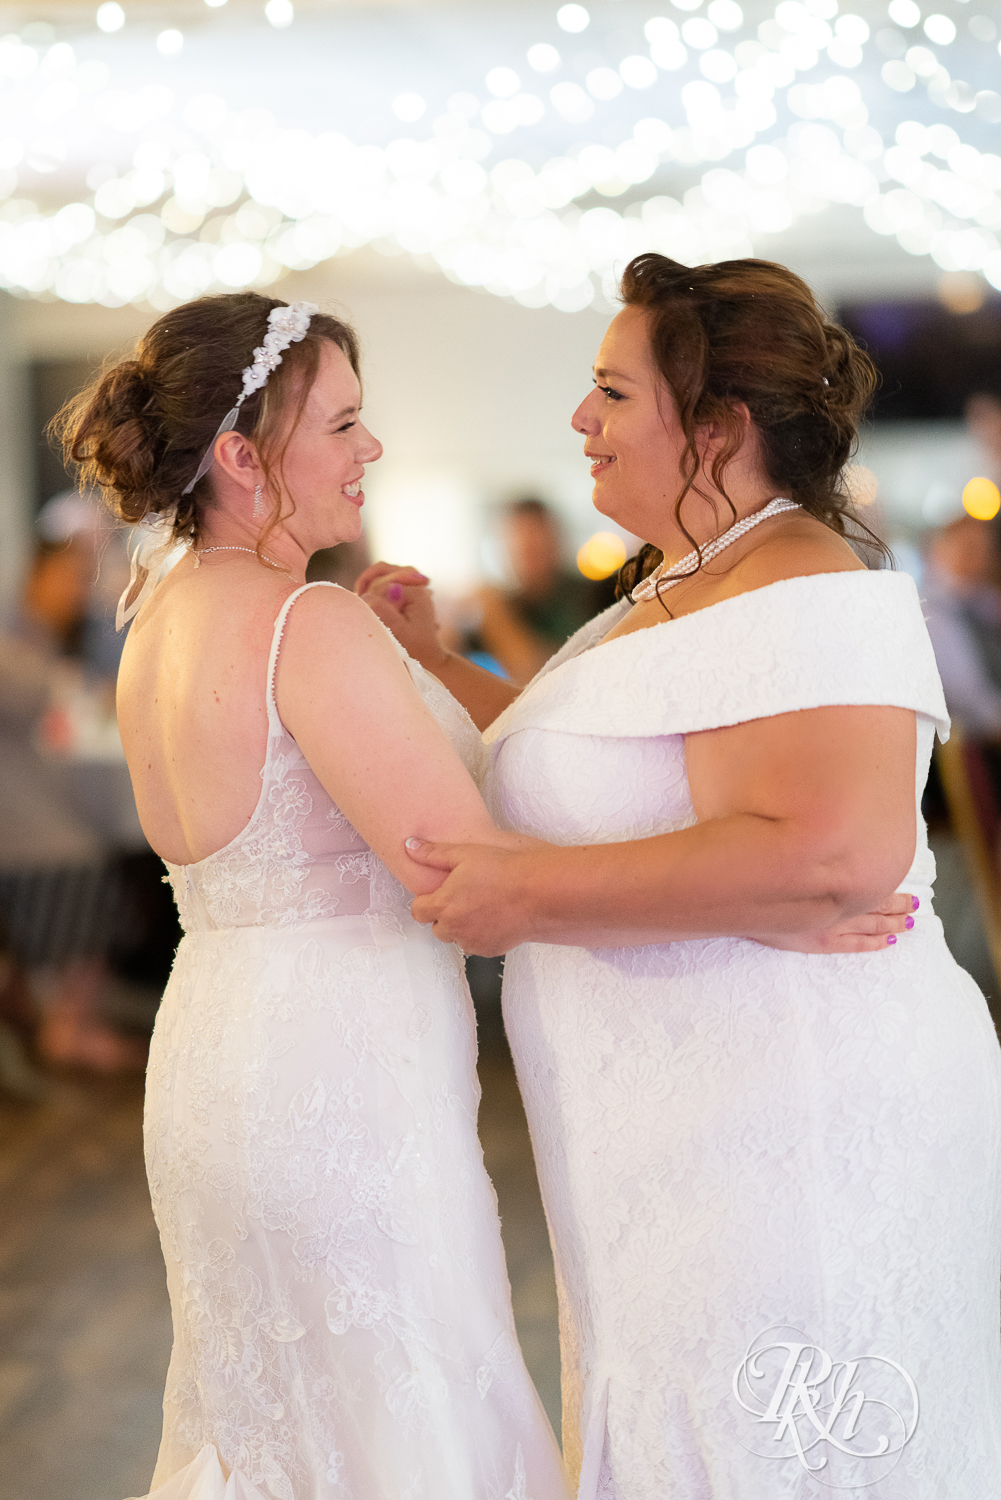 Lesbian brides share first dance at wedding reception at Willy McCoy's in Champlin, Minnesota.